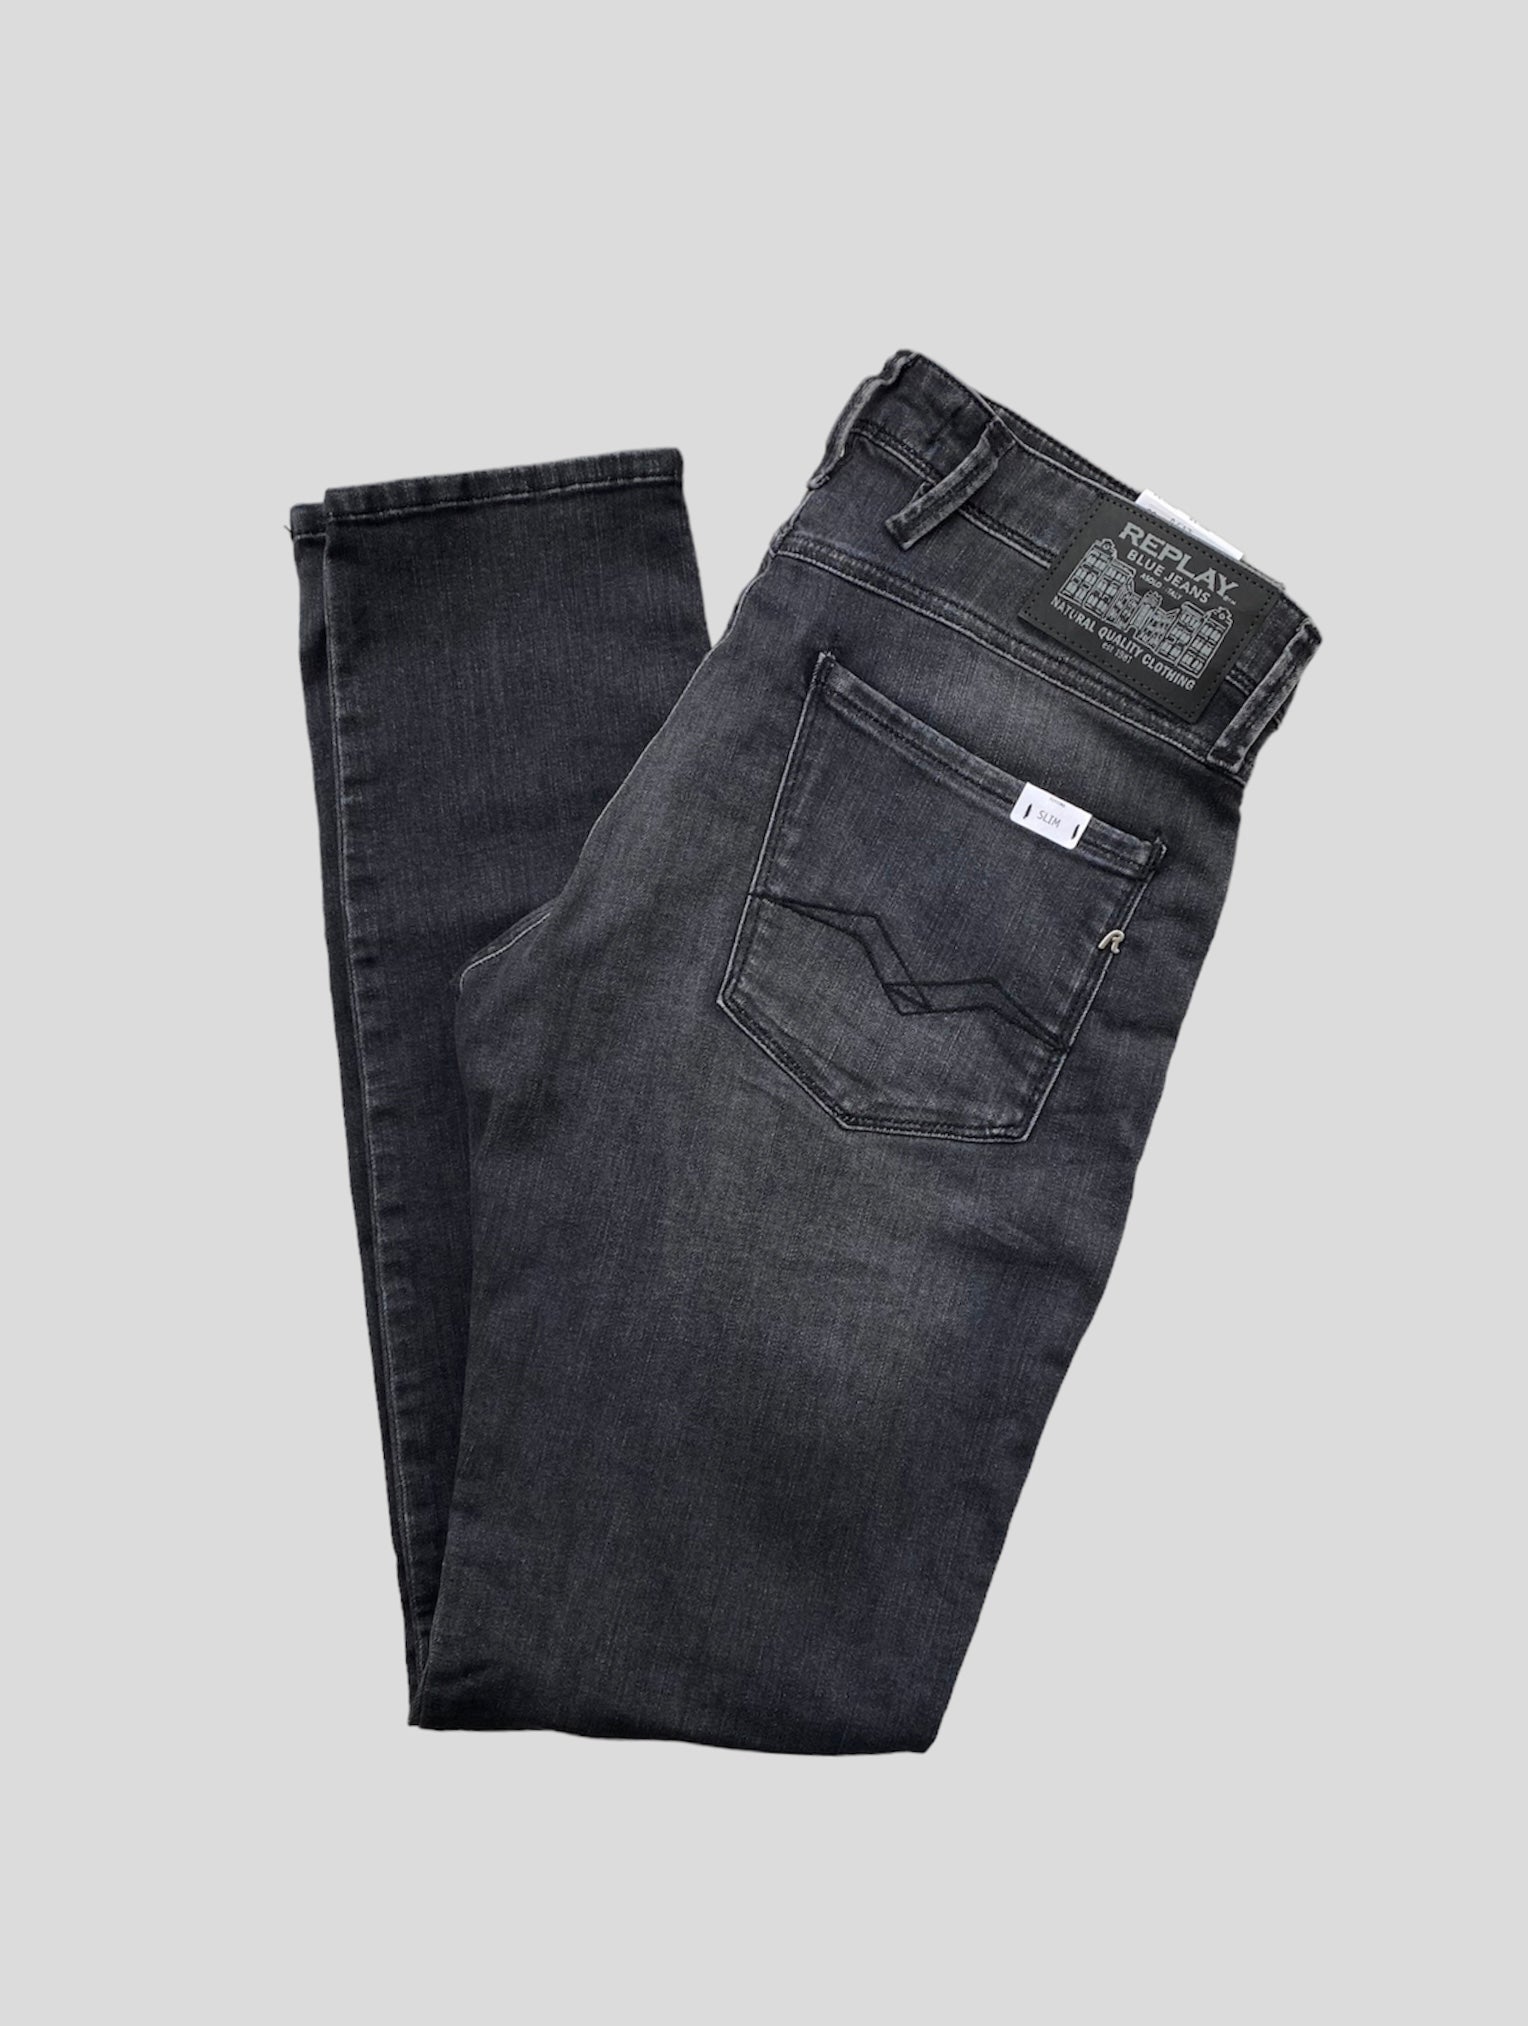 Replay "Power Stretch" Anbass Slim Fit Jeans Washed Black